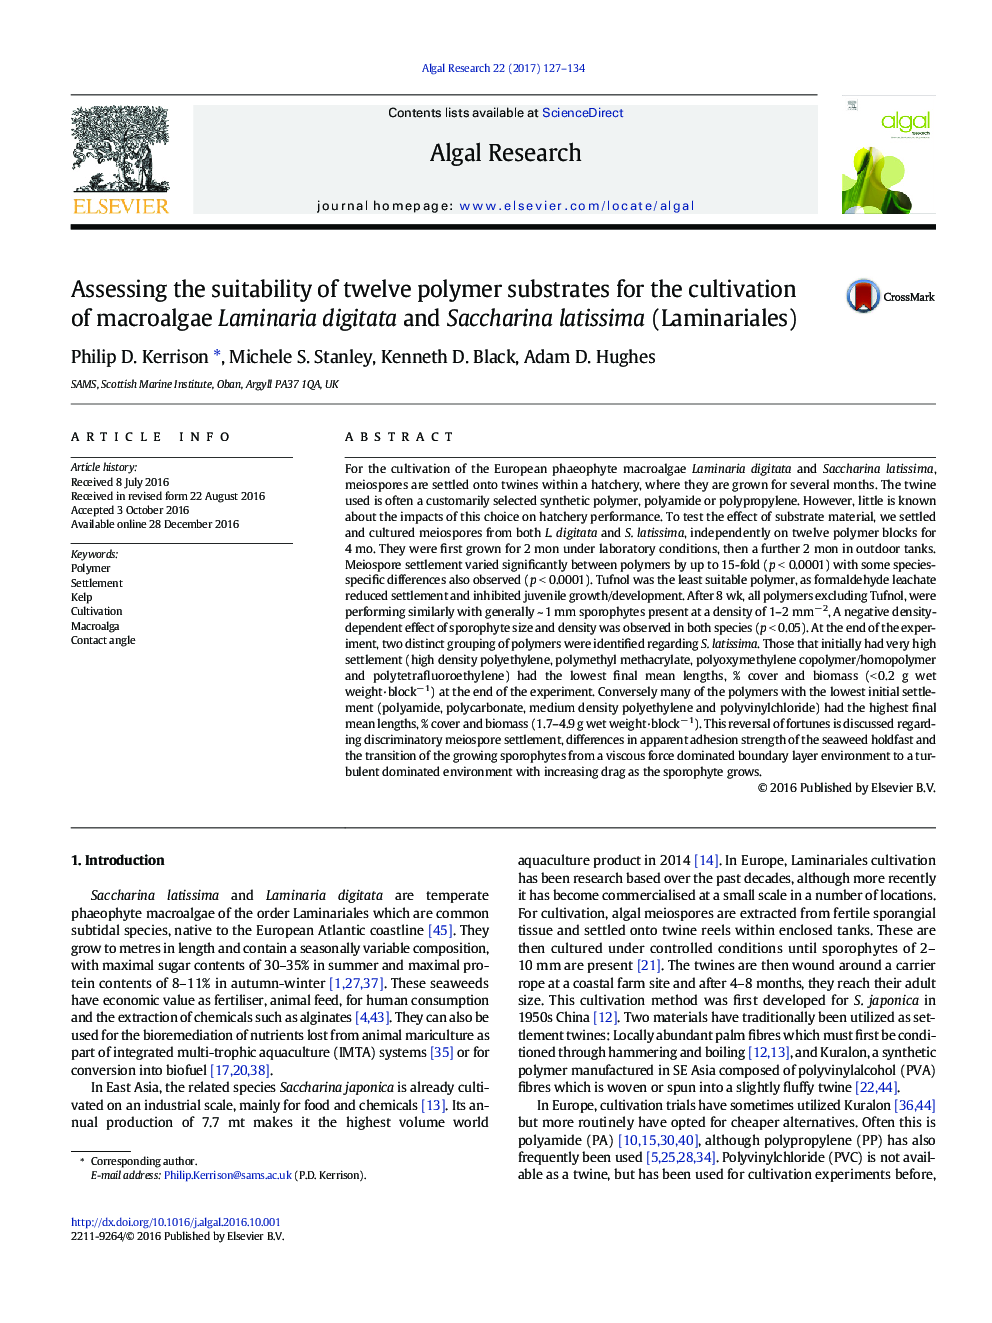 Assessing the suitability of twelve polymer substrates for the cultivation of macroalgae Laminaria digitata and Saccharina latissima (Laminariales)